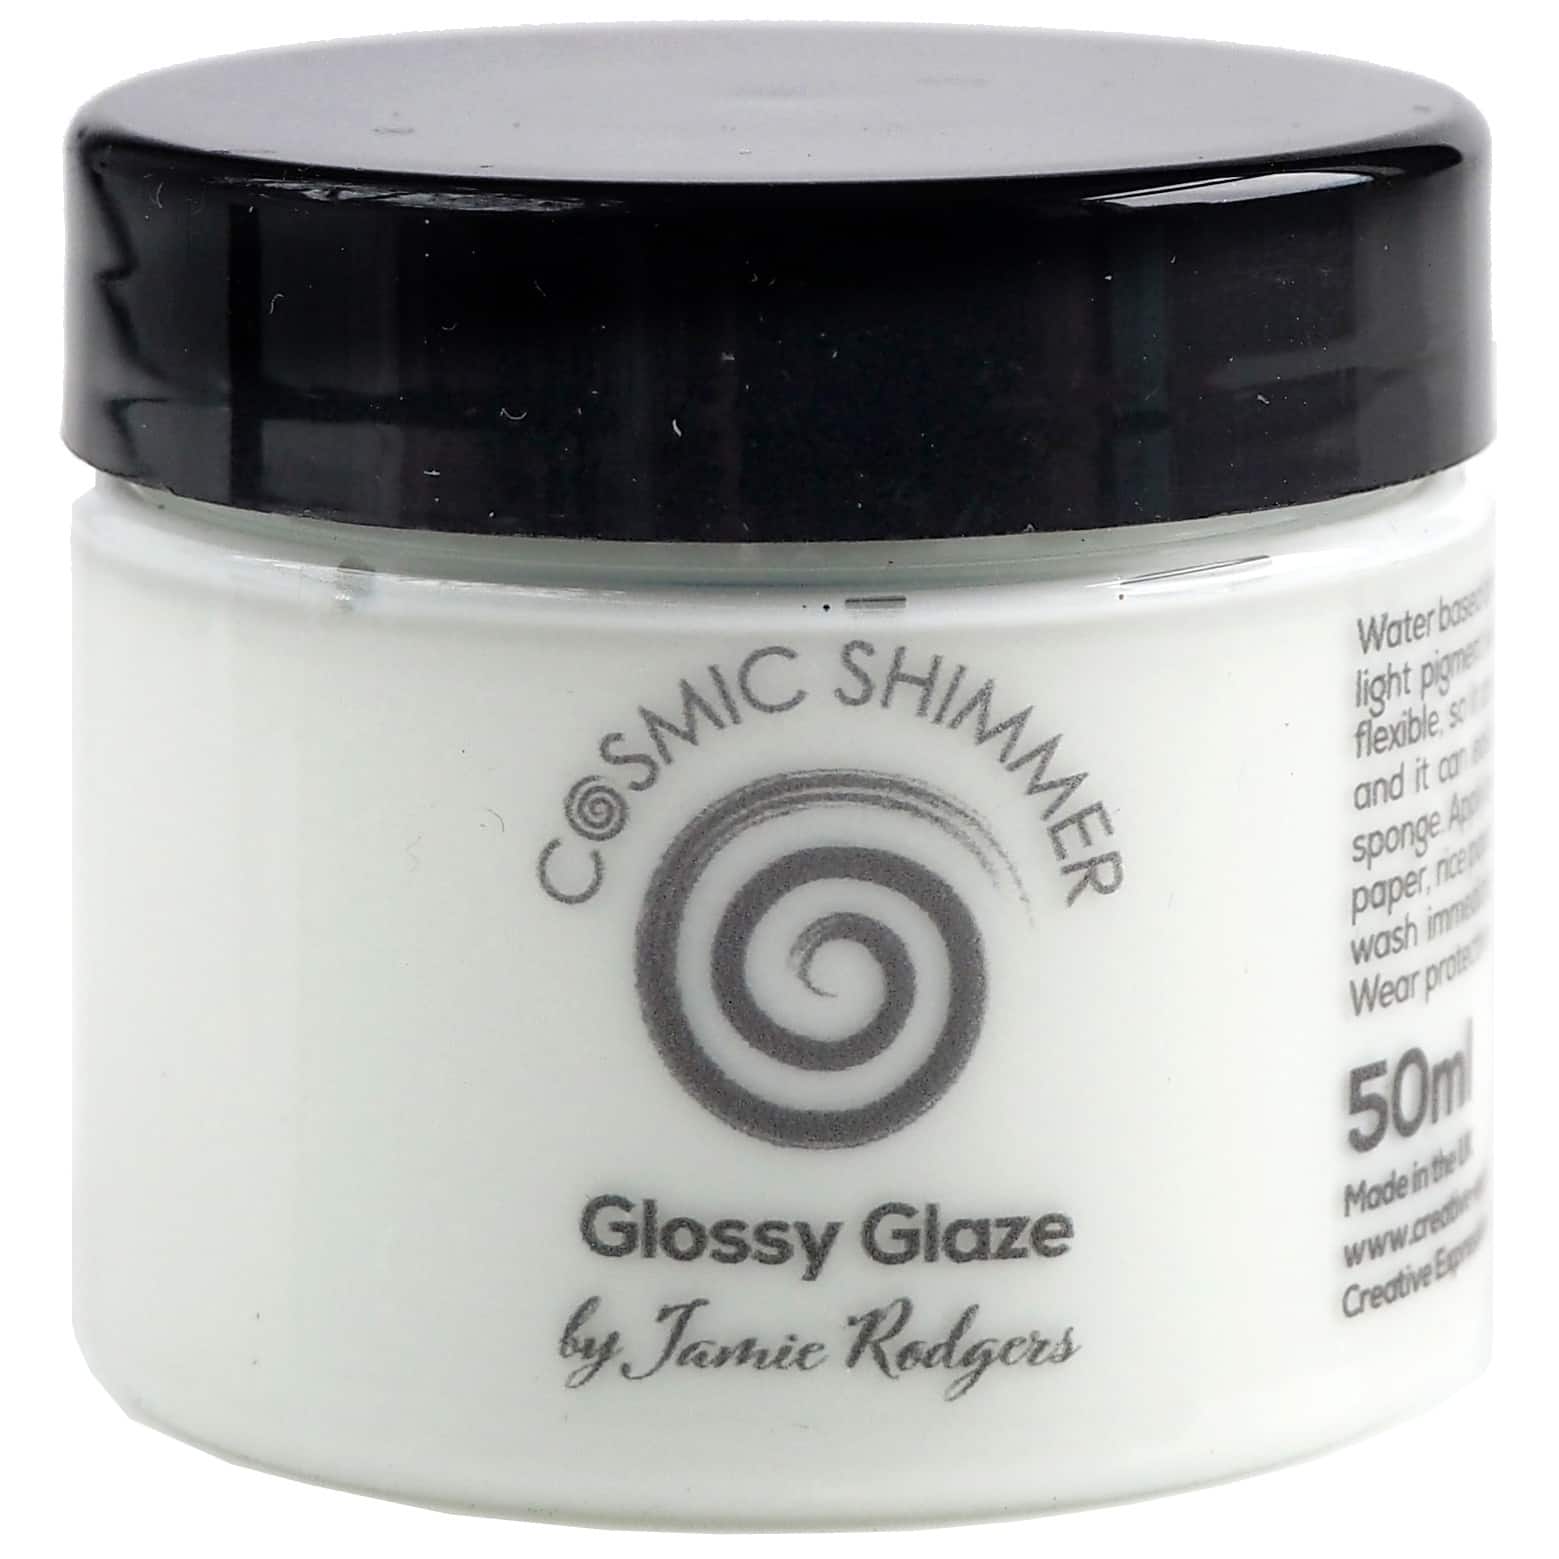 Cosmic Shimmer Glossy Glaze by Jamie Rodgers